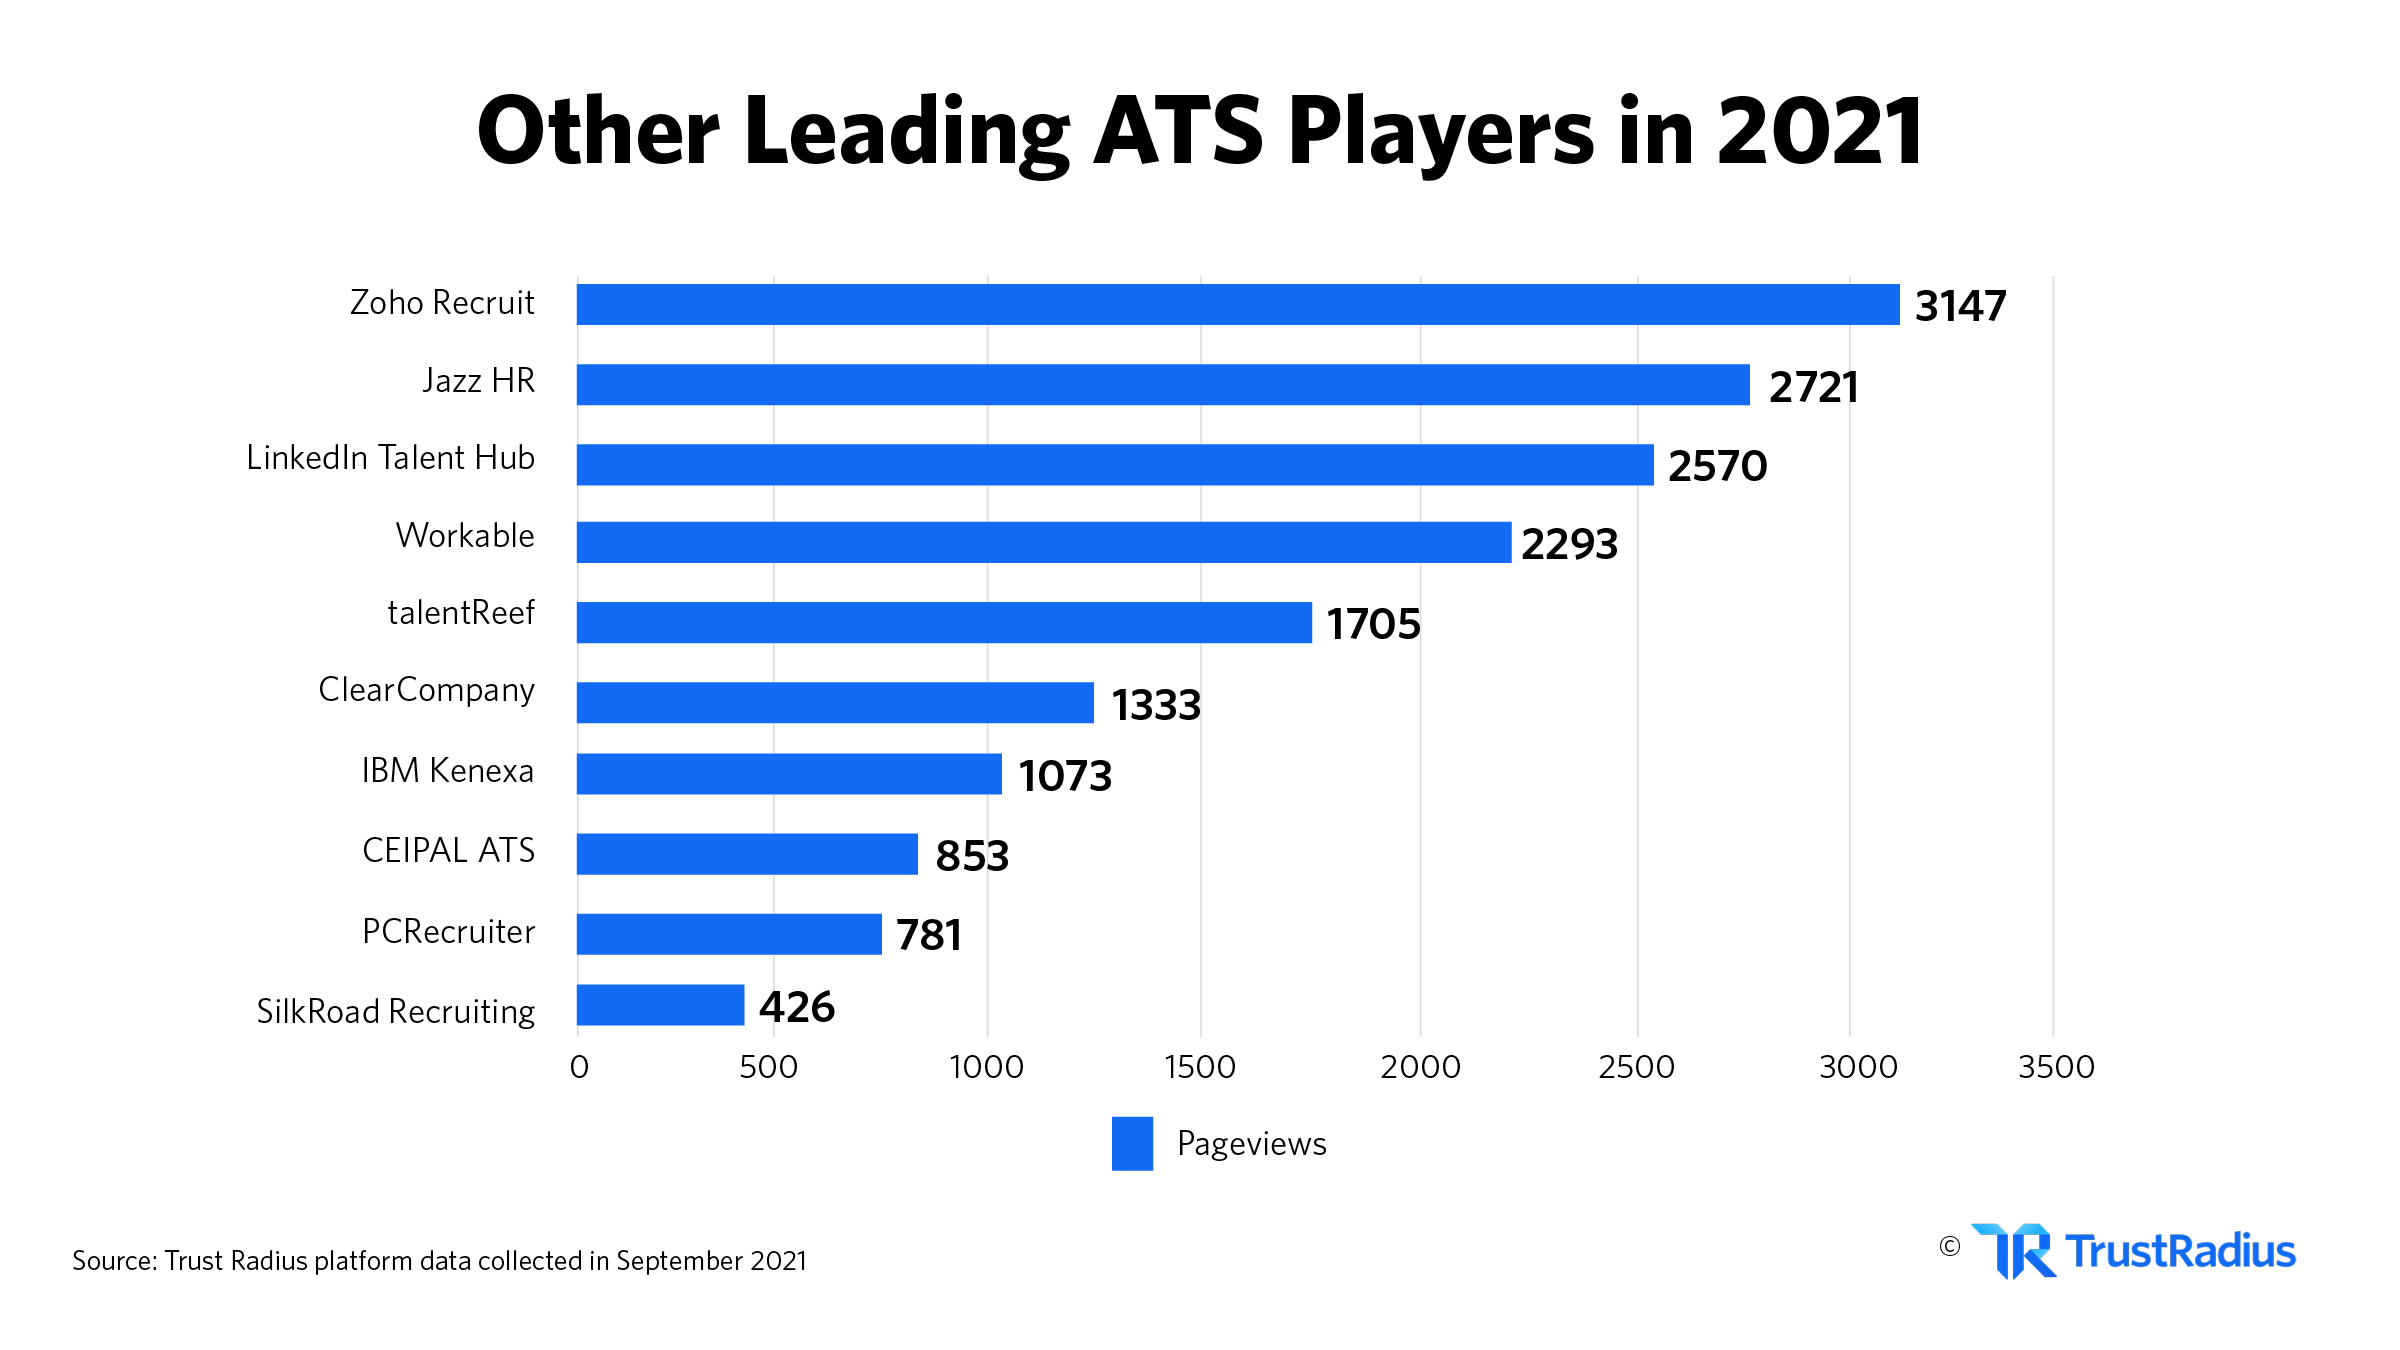 Other leading ATS players in 2021